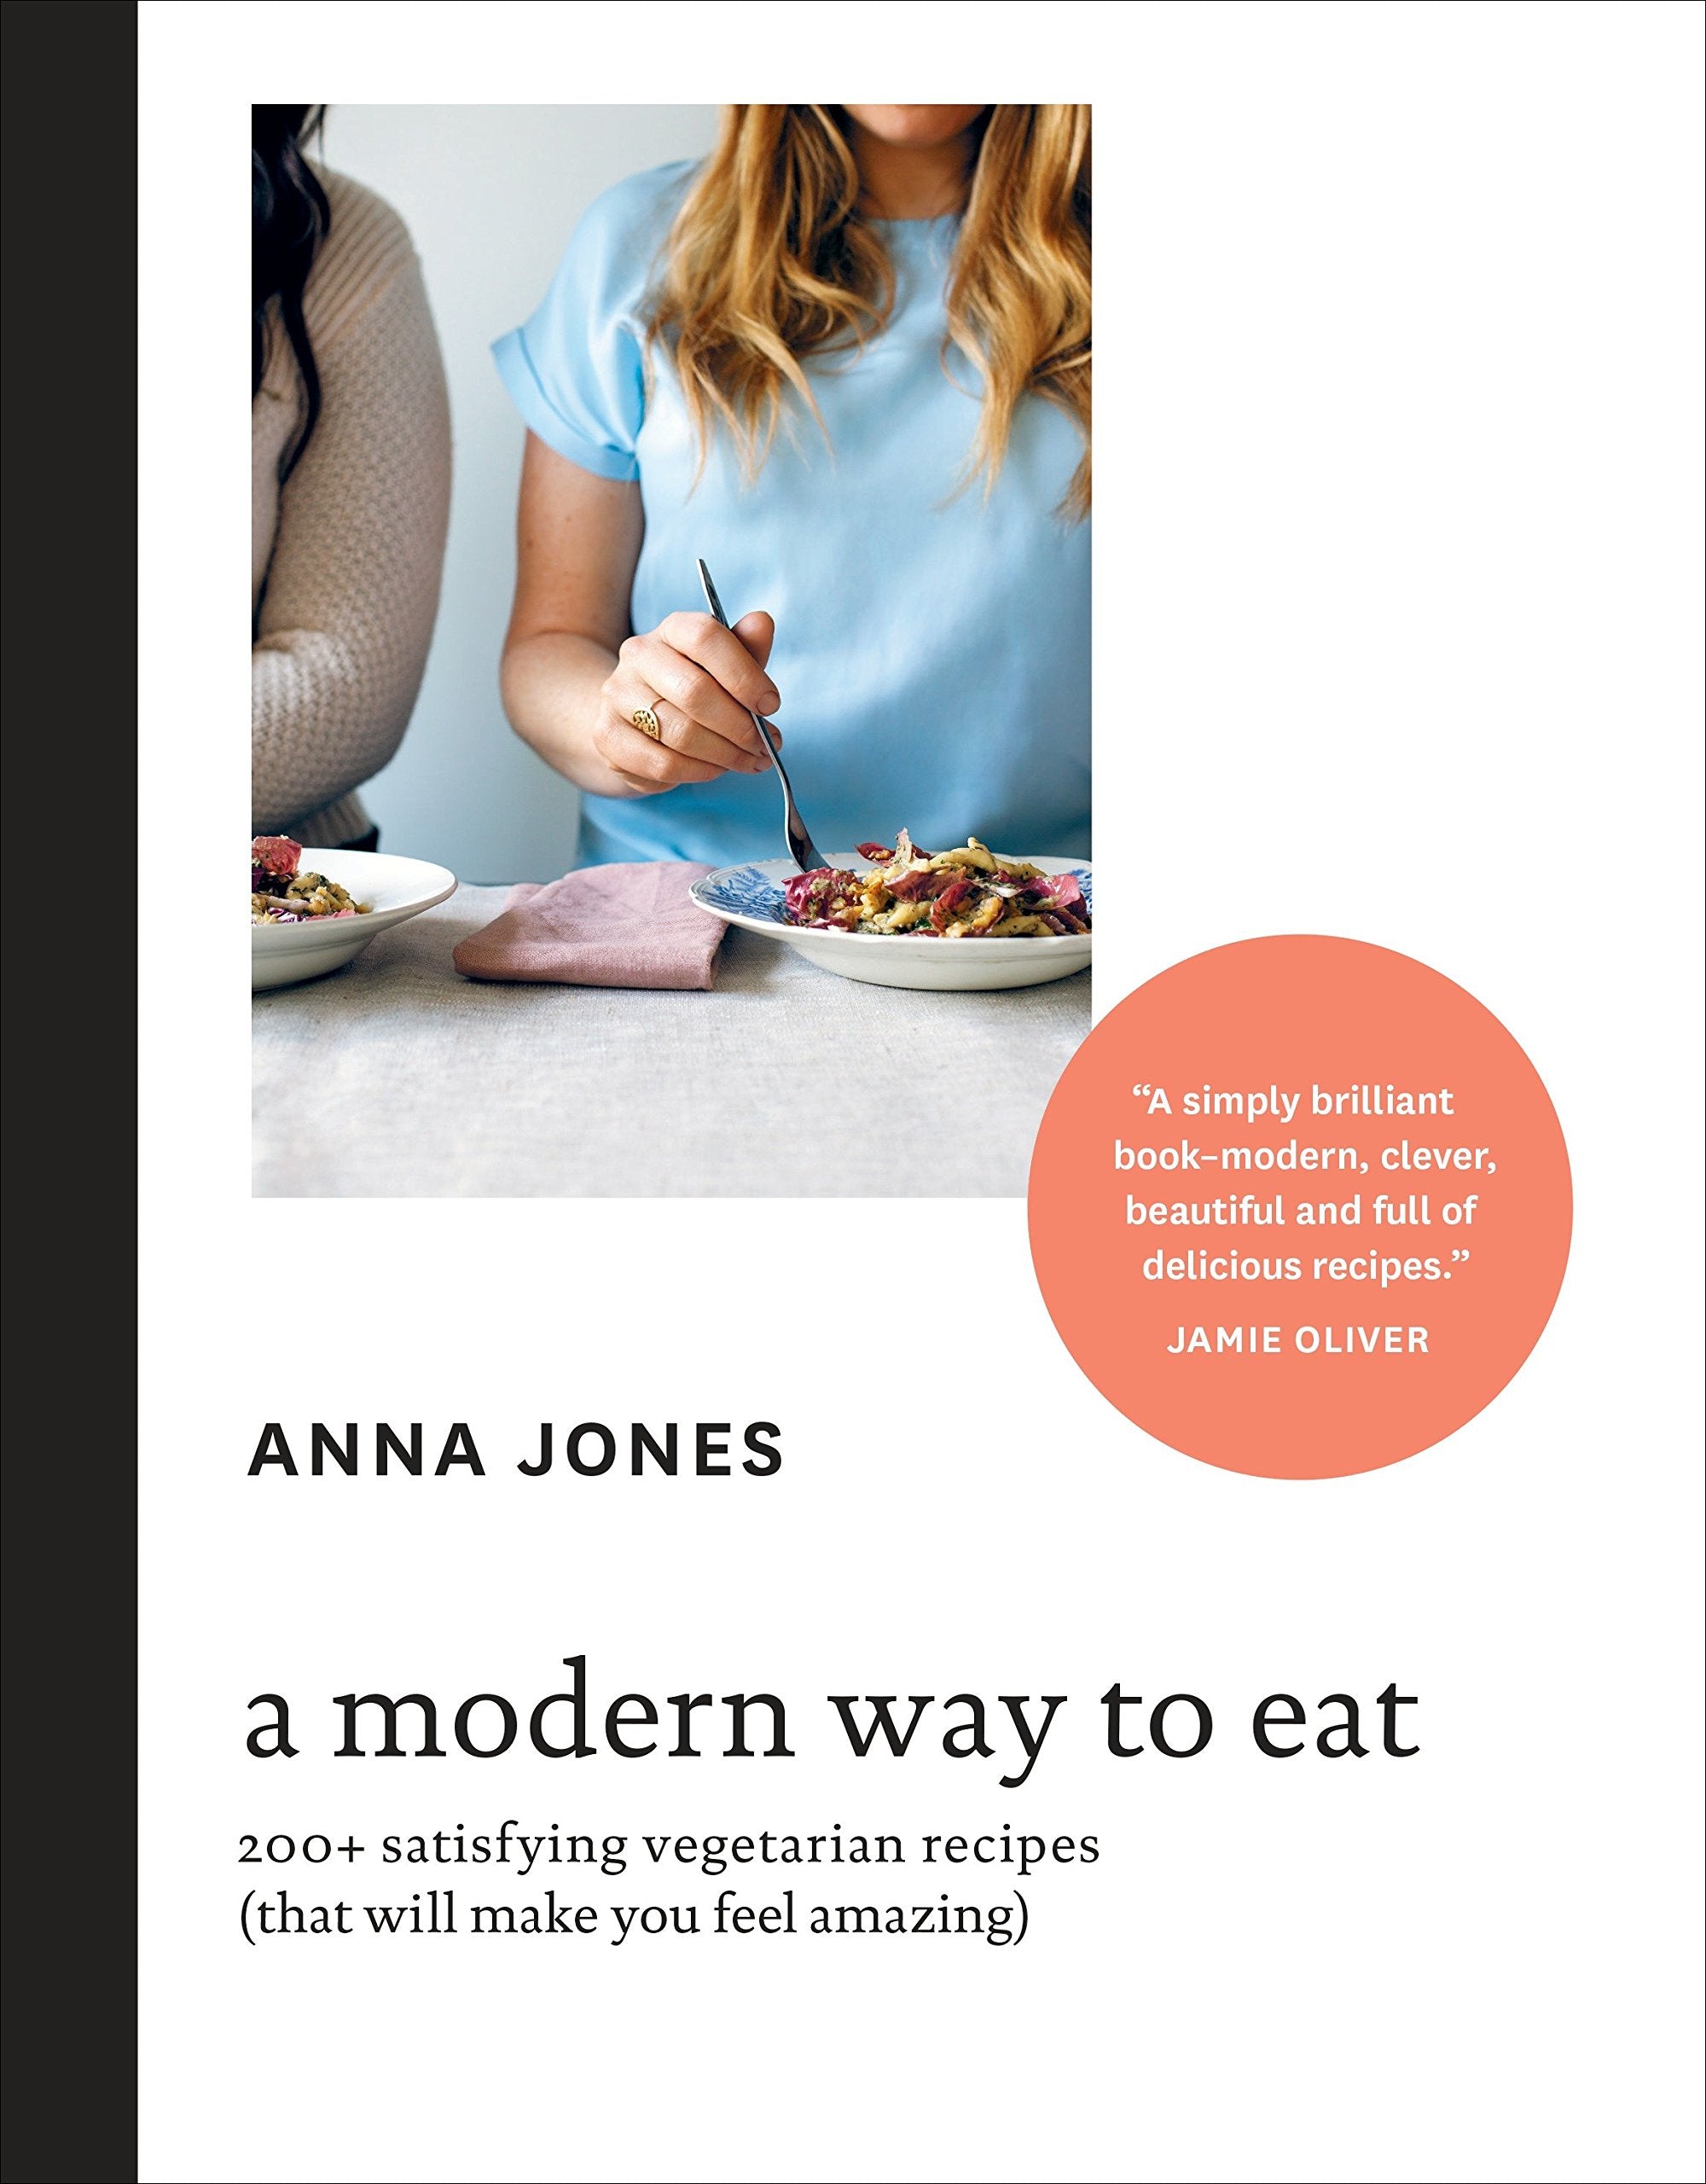 A Modern Way to Eat: 200+ Satisfying Vegetarian Recipes (That Will Make You Feel Amazing) (Anna Jones)